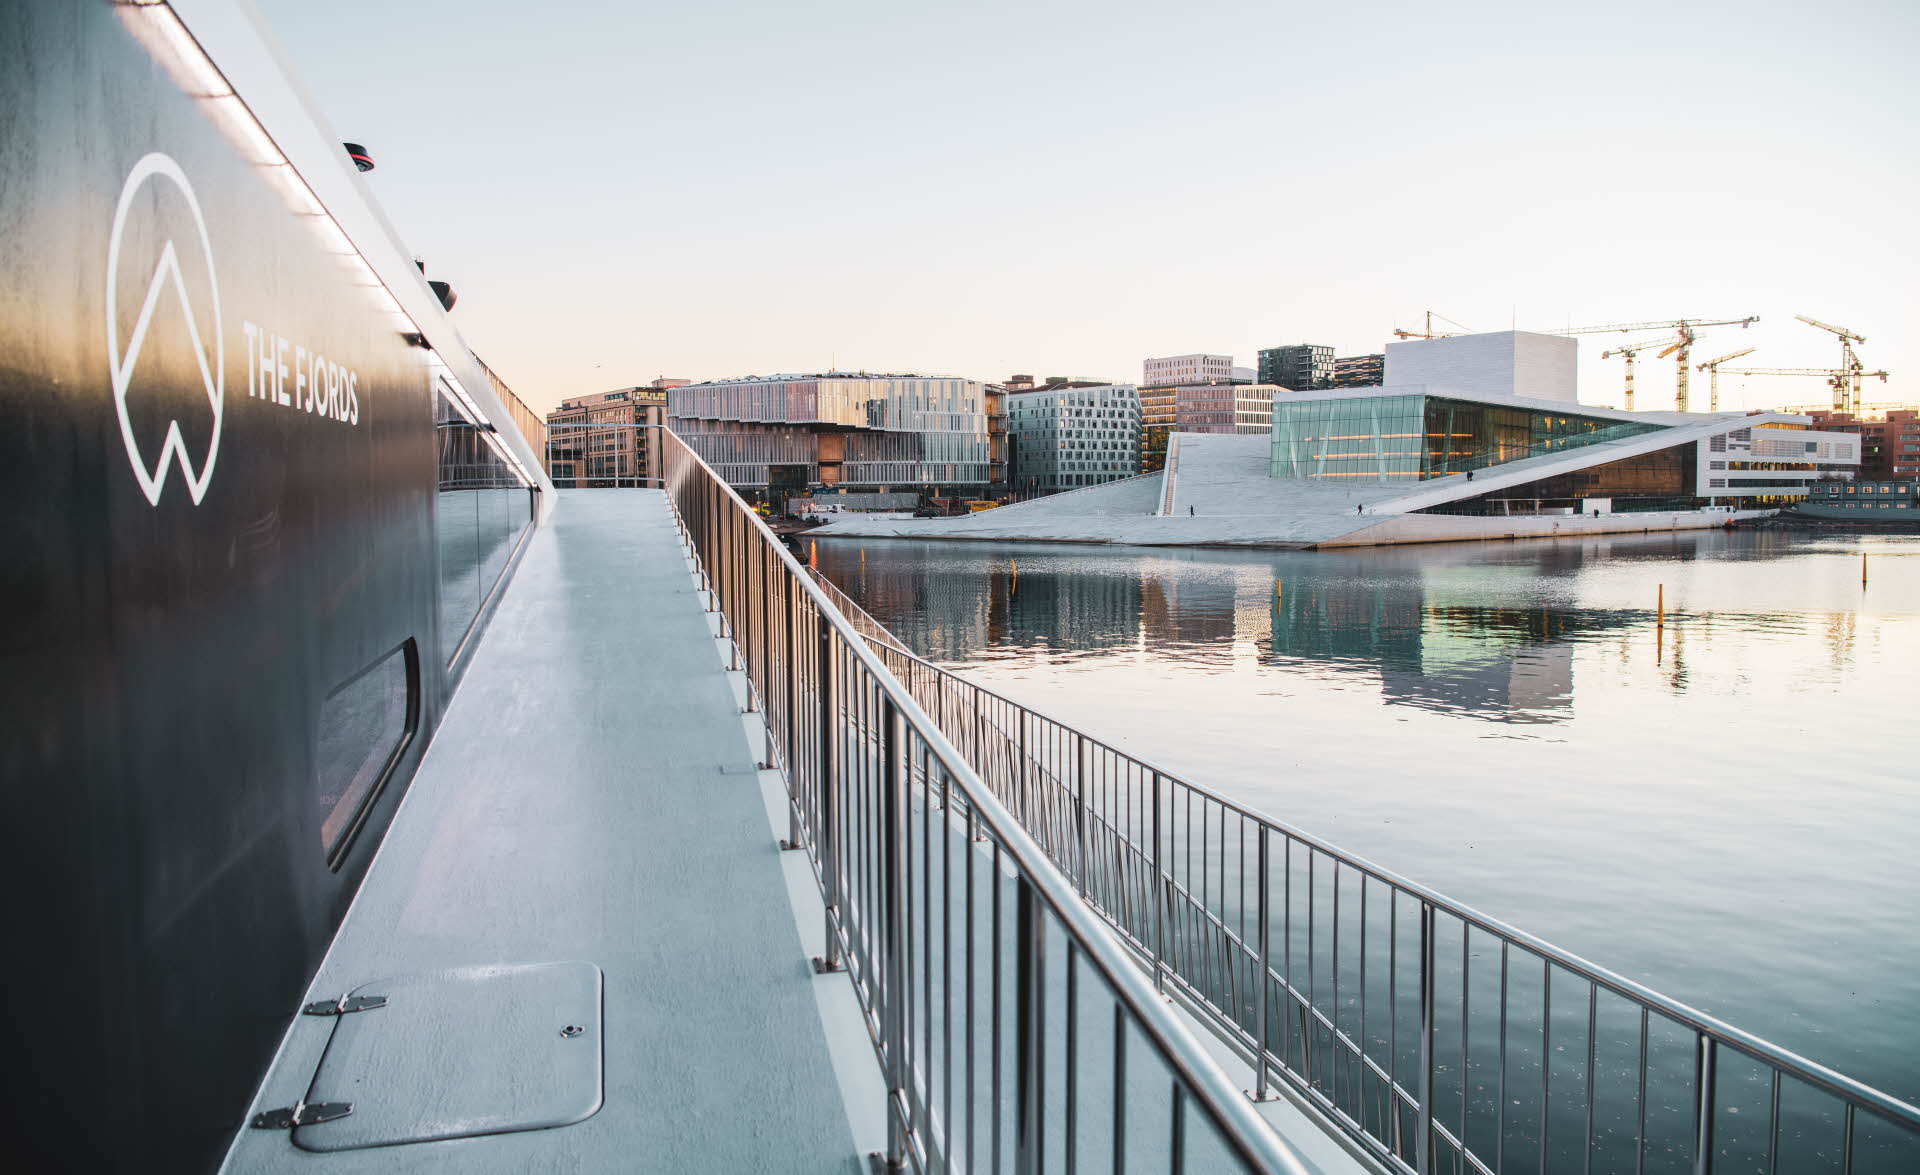 Viewing the Oslo opera house from deck on board The Fjords vessel as sunrise